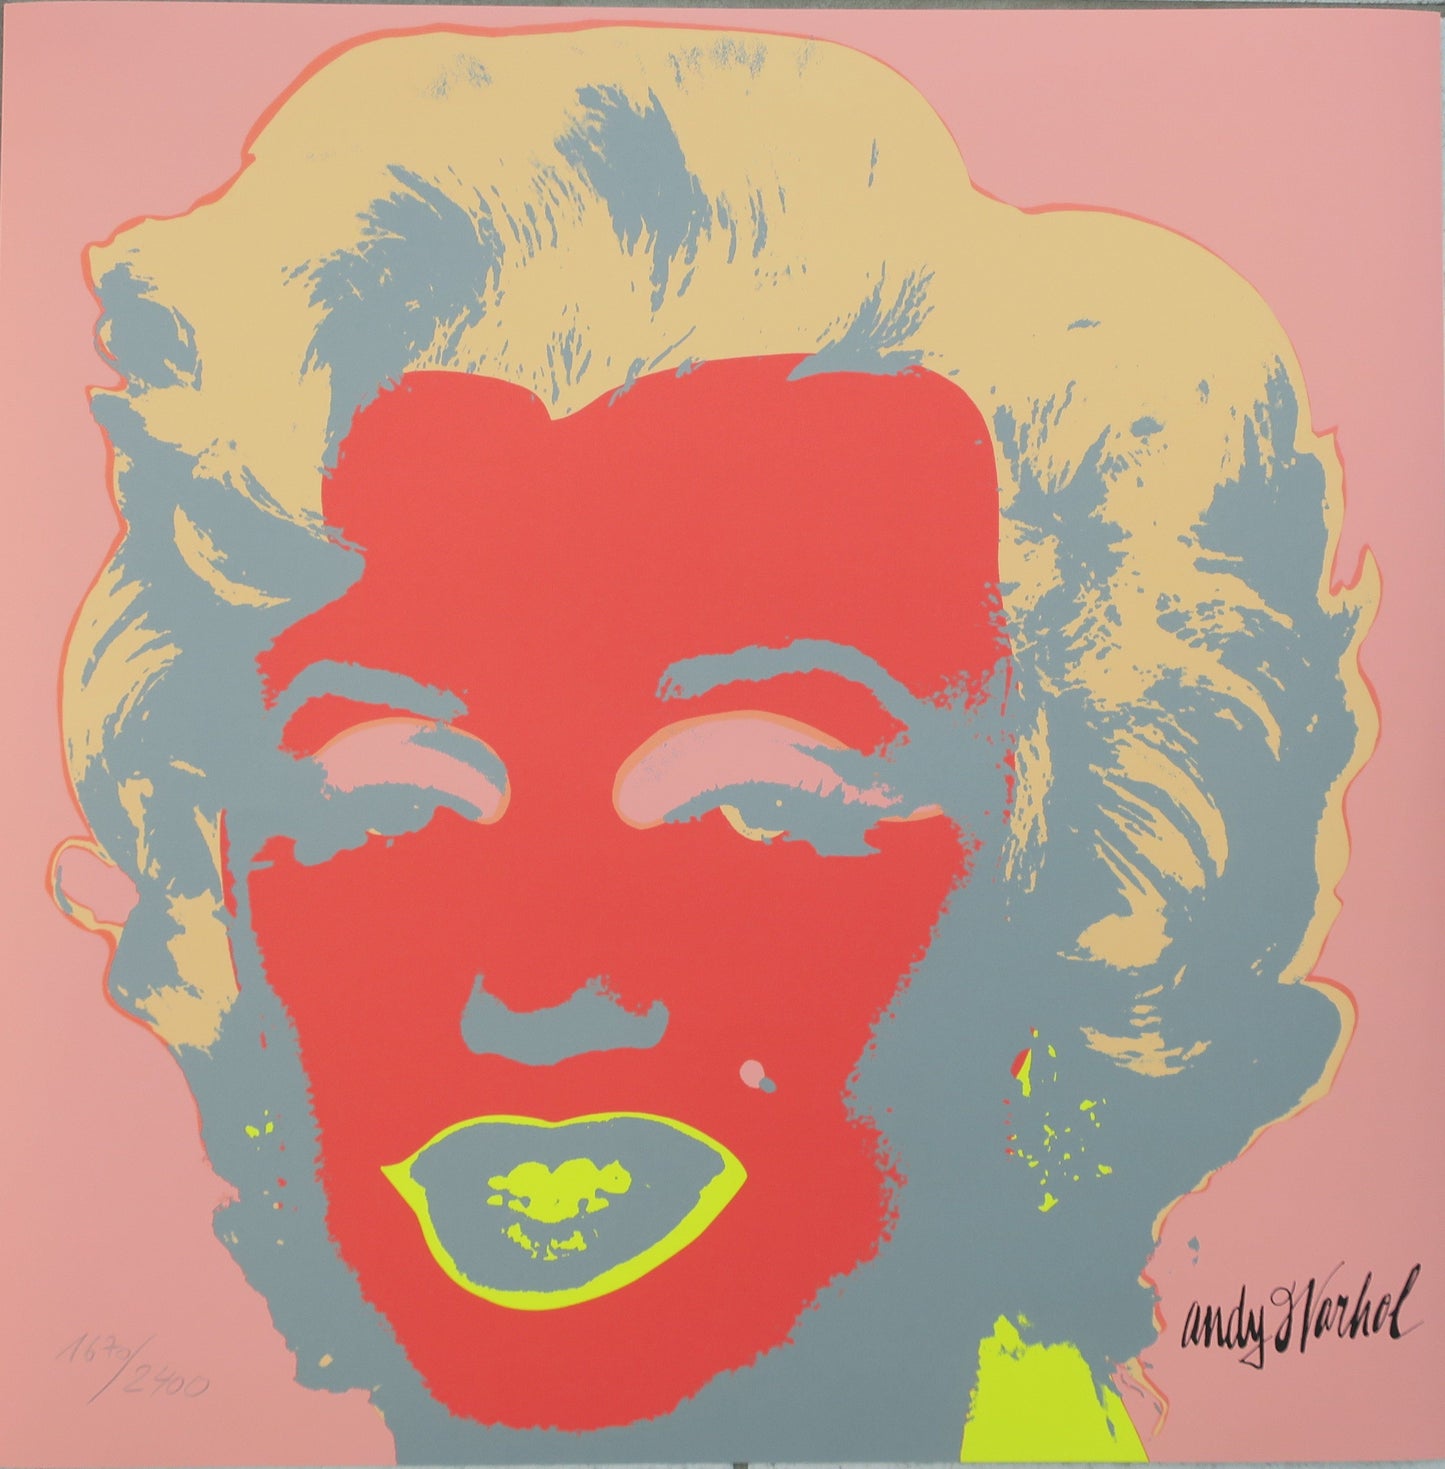 Andy Warhol signed Lithograph Marilyn